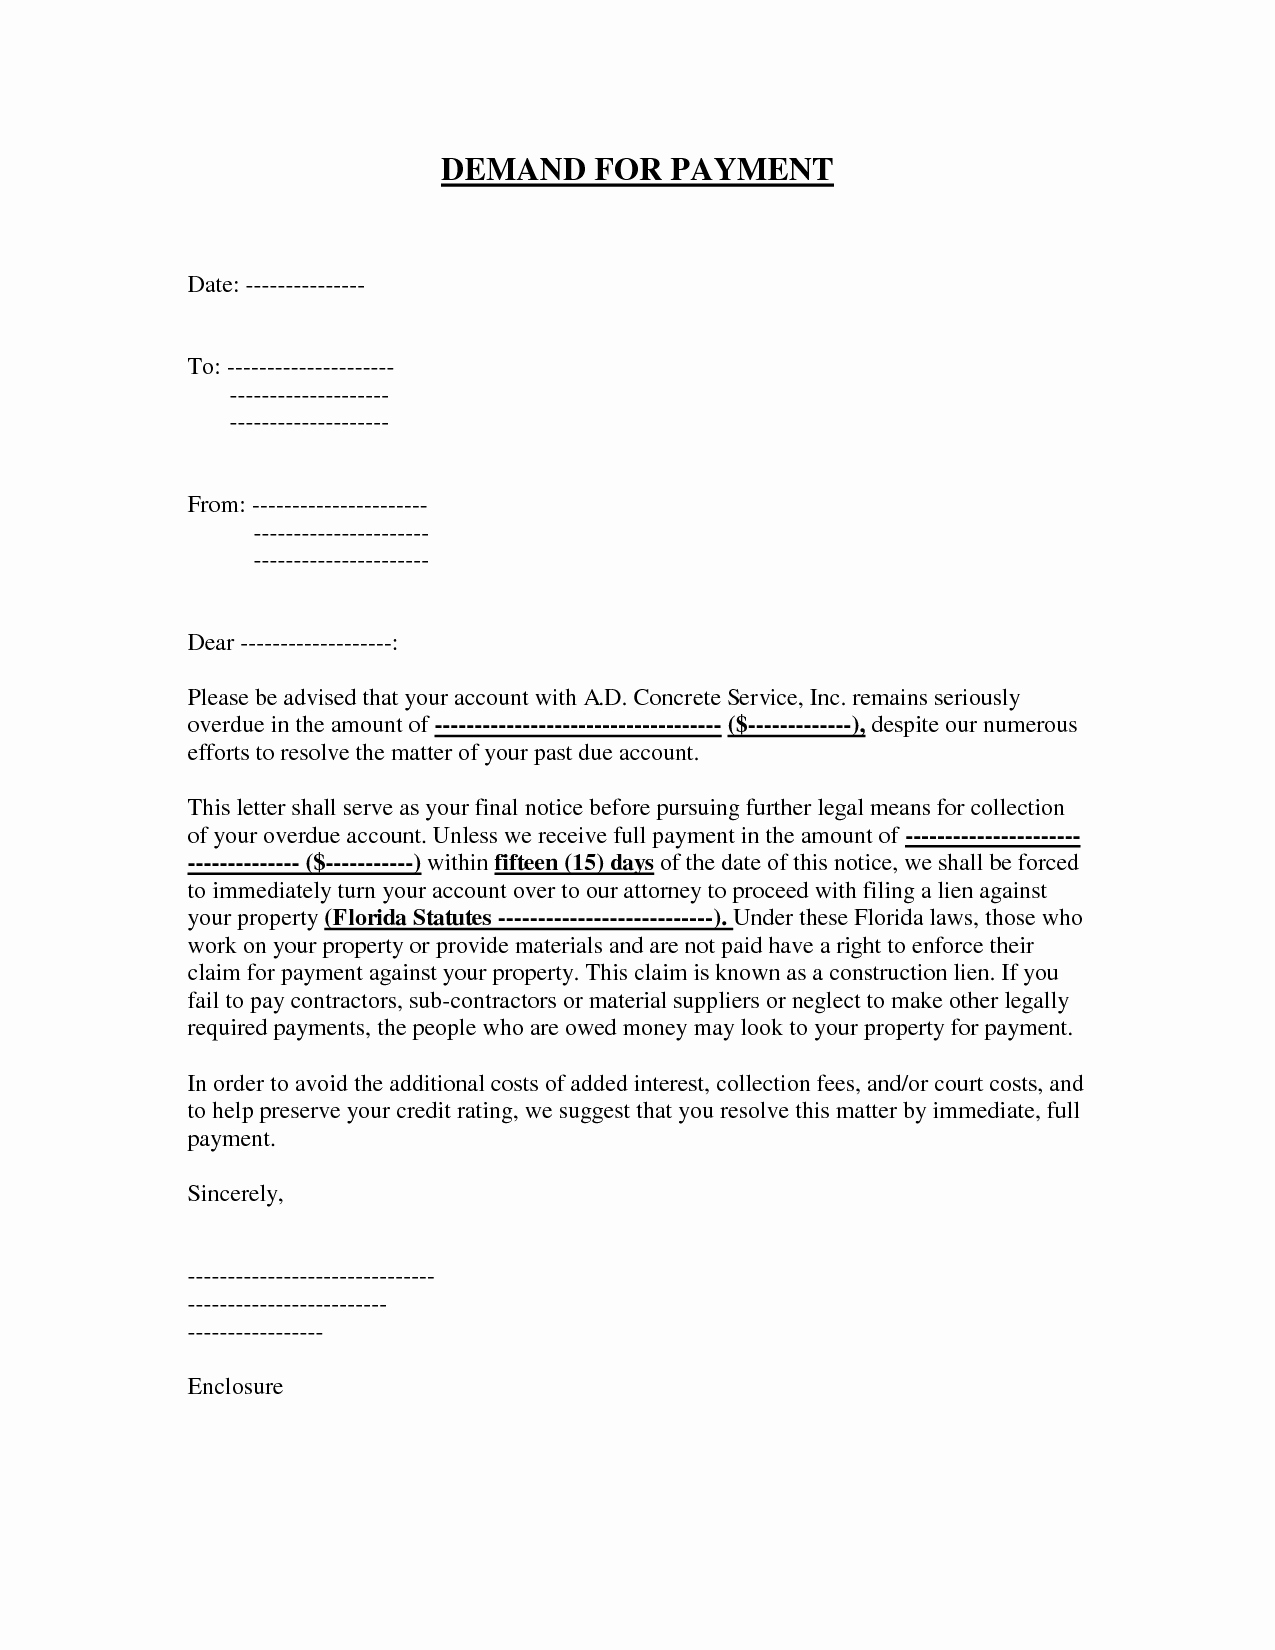 Collection Demand Letter Template Unique Best S Of Demand for Payment Collection Letters